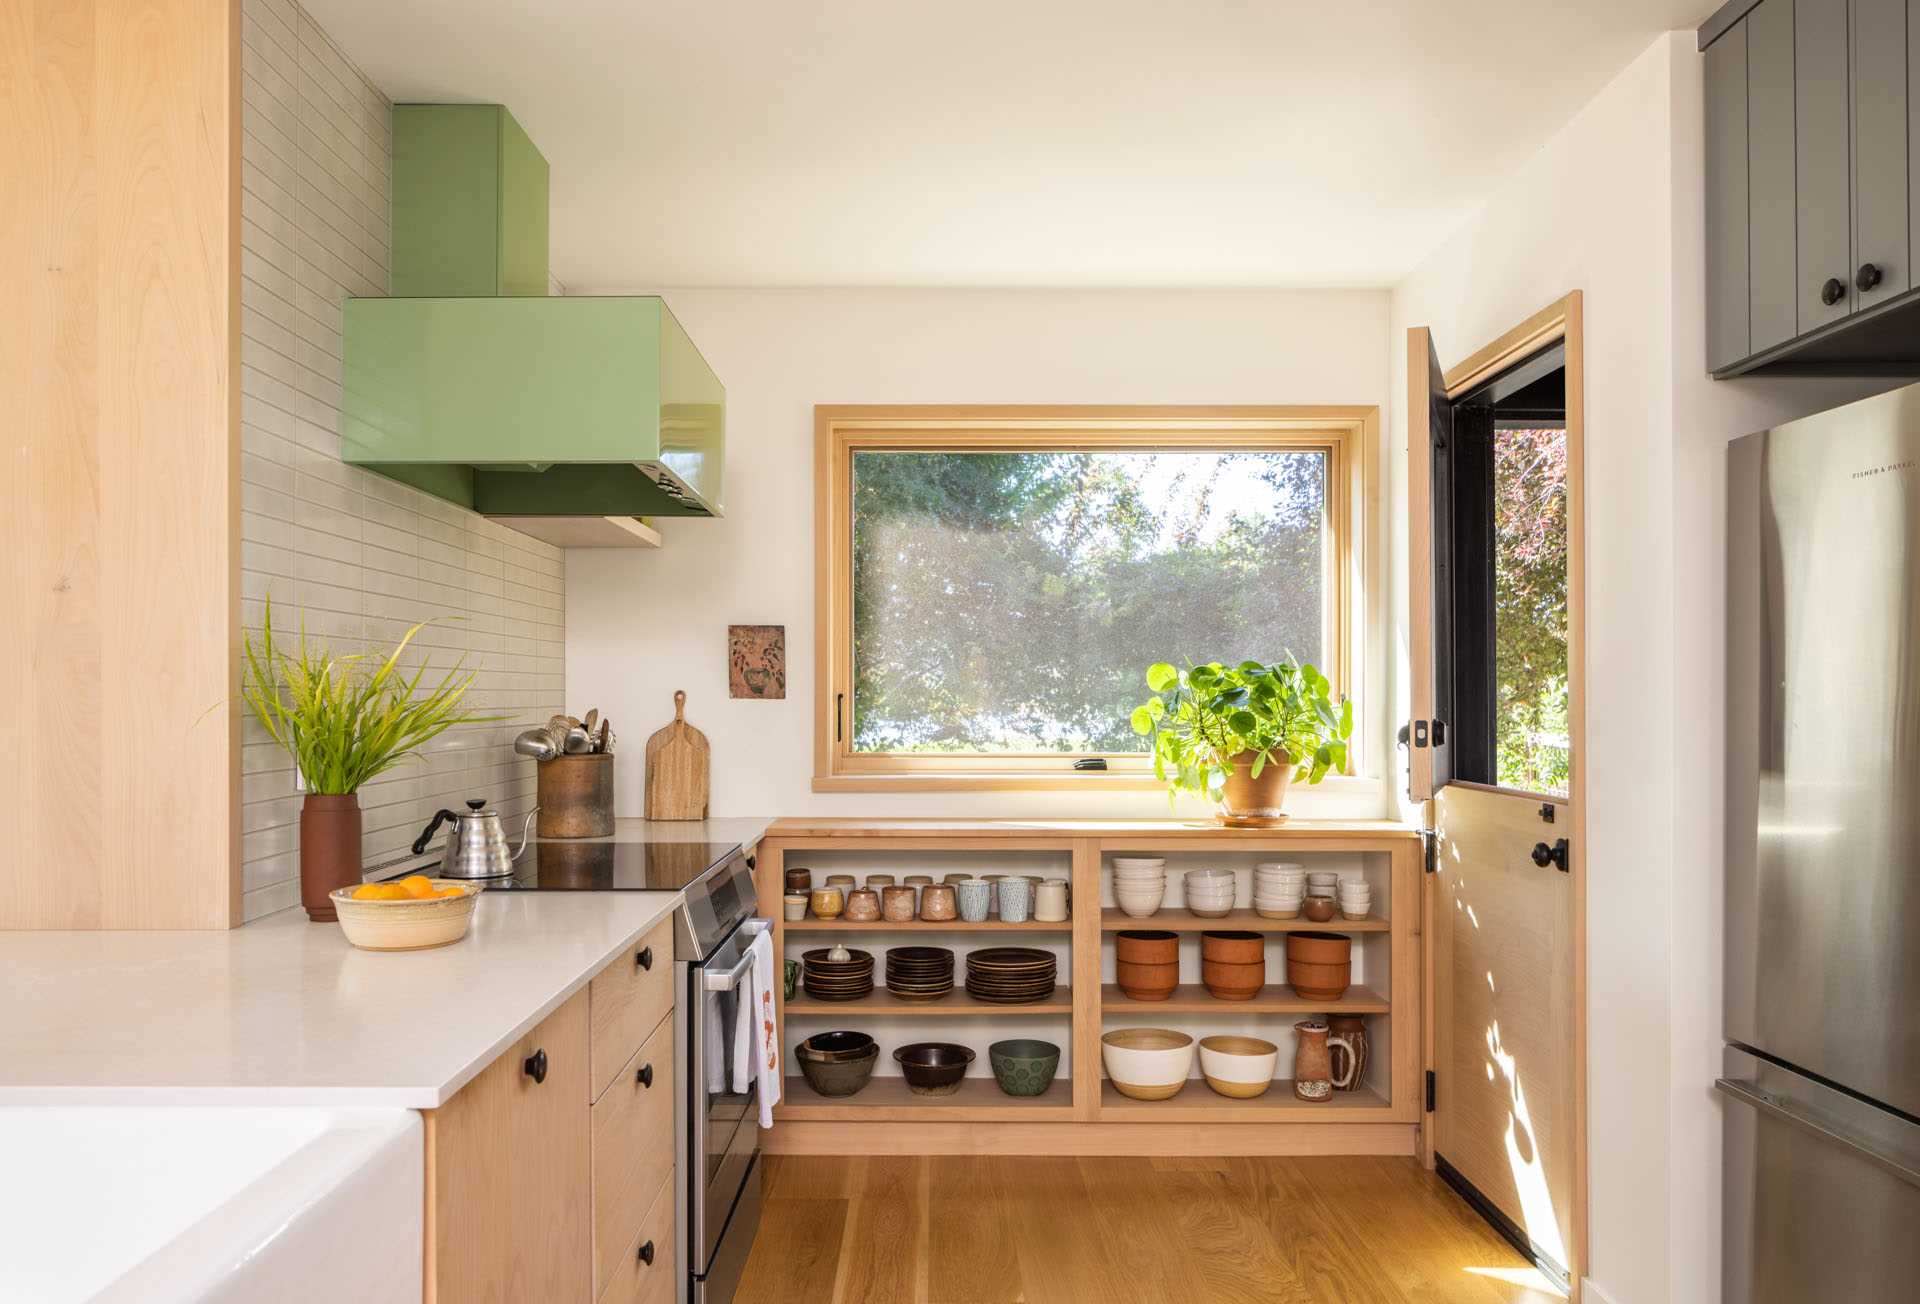 A remodeled kitchen with new light wood cabinets and open shelving, a pastel green range hood, a light-tiled wall, and wood floors. A Dutch door was also added.